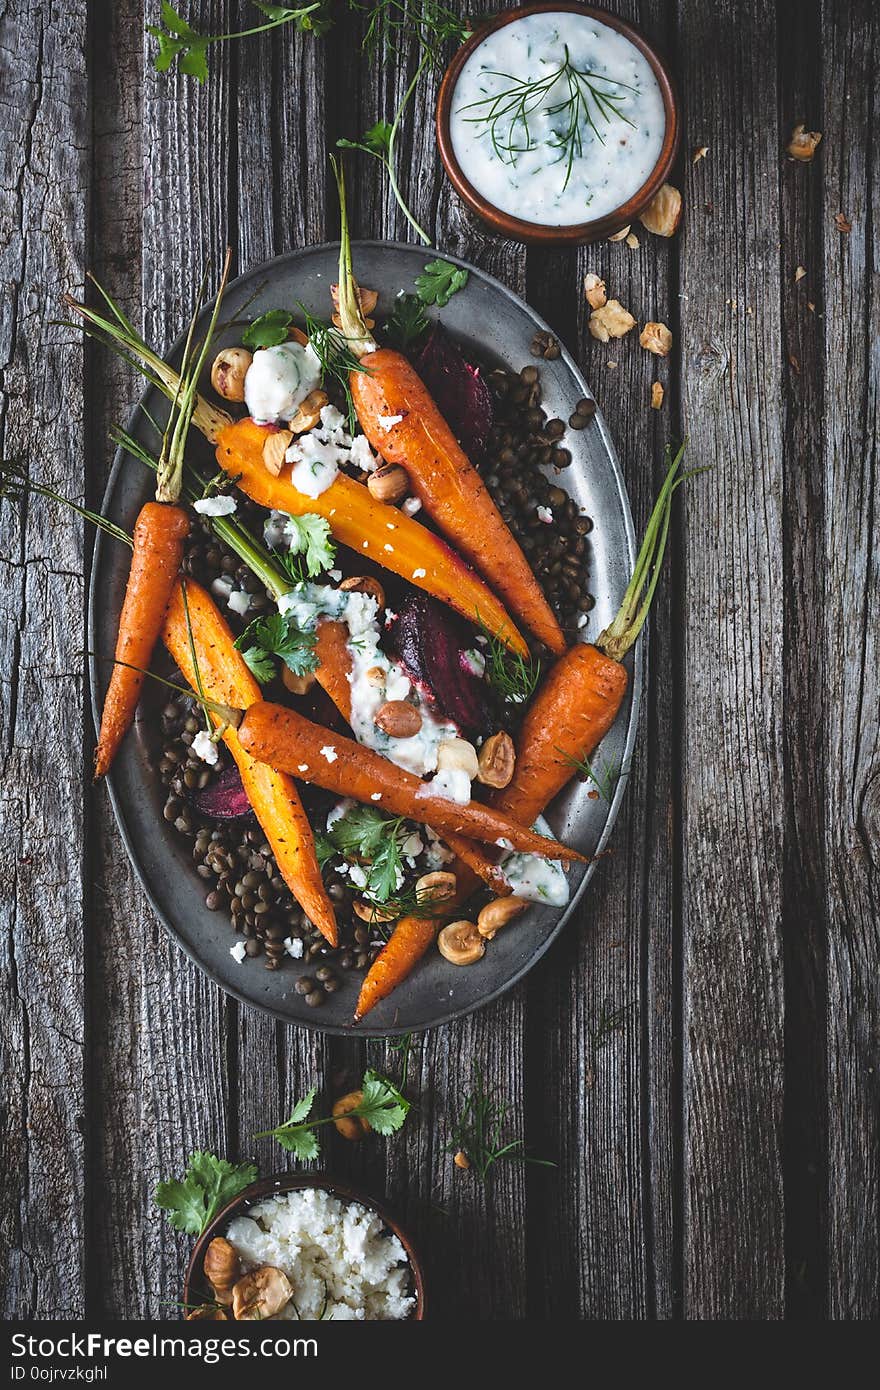 Lentil Salad with Roasted Carrots, Beetroots and Feta Cheese on wooden background